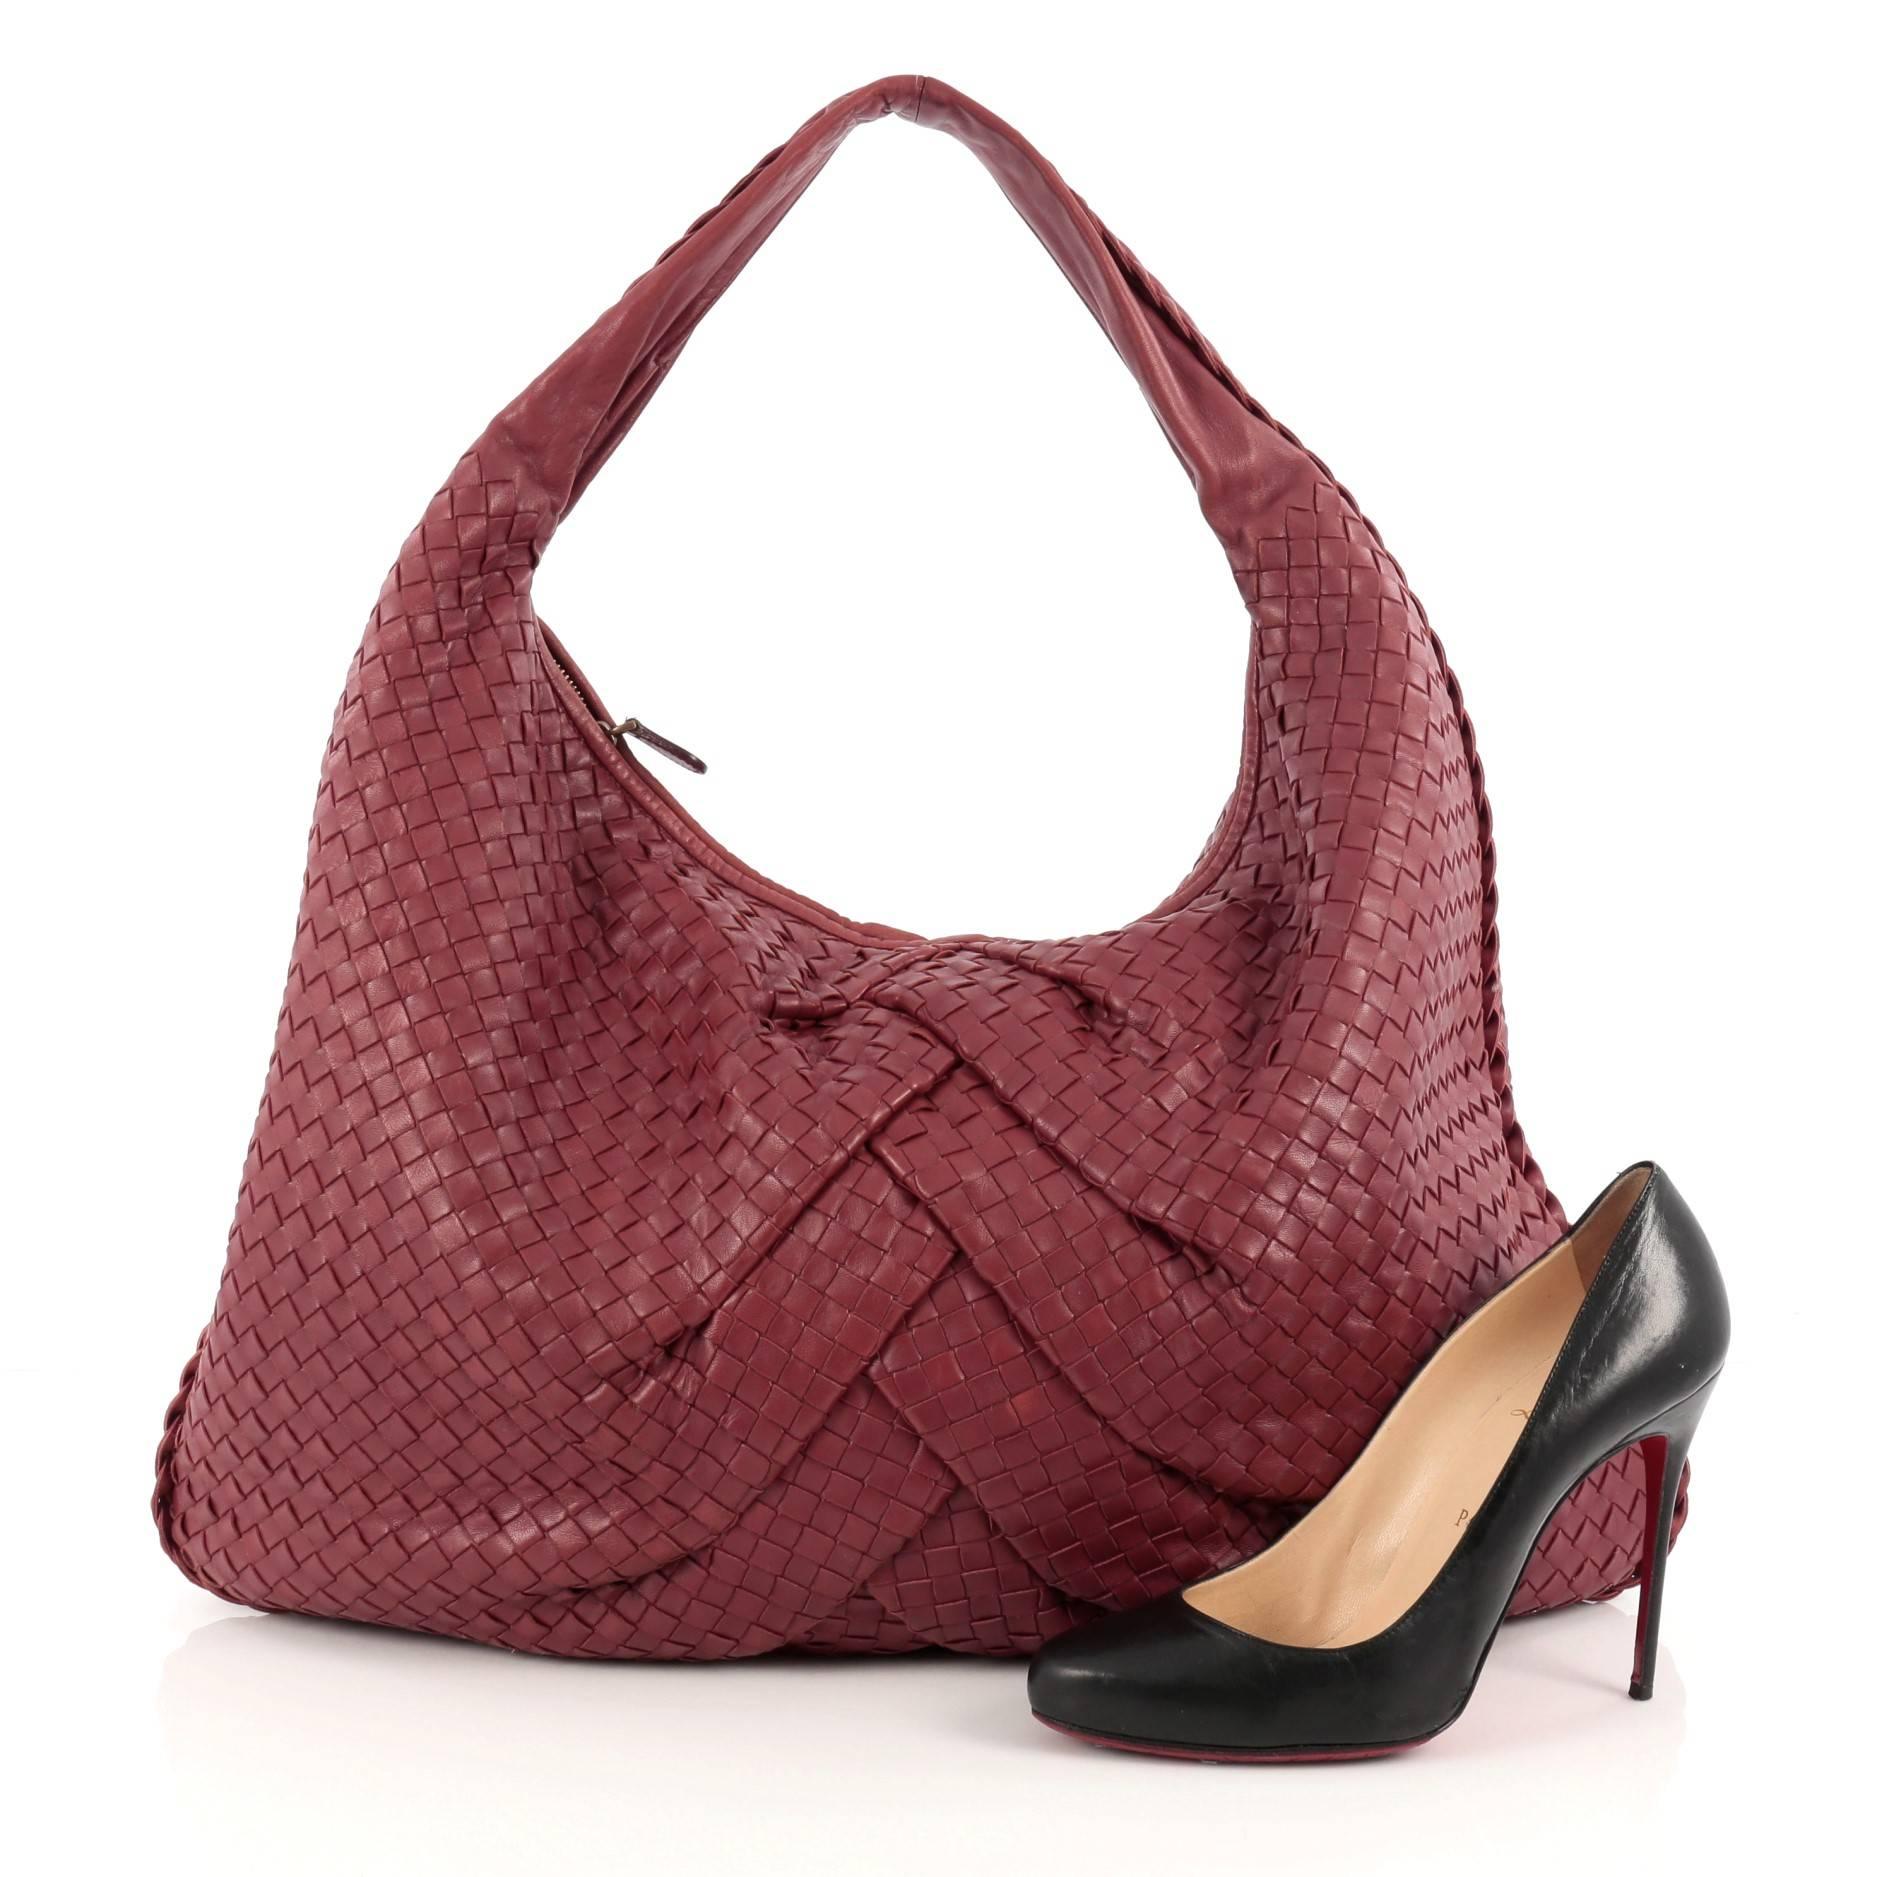 This authentic Bottega Veneta Veneta Hobo Pleated Intrecciato Nappa Maxi is a timelessly elegant bag with a pleated silhouette. Crafted from brick red leather woven in Bottega Veneta's signature intrecciato method, this effortless, exquisite hobo